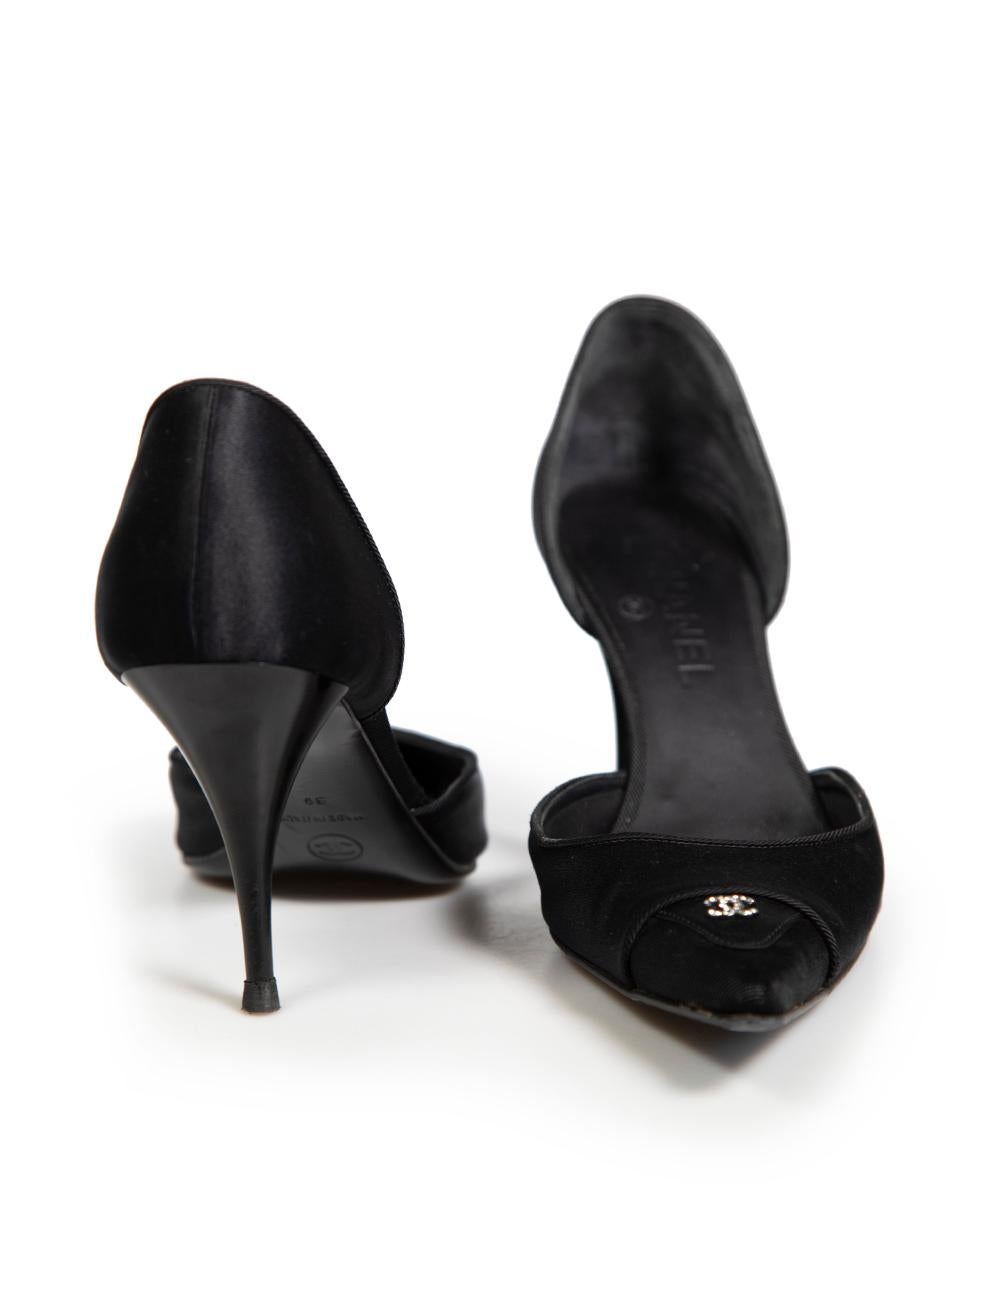 Chanel Black Satin Crystal Embellished Interlocking CC Heels Size IT 39 In Good Condition For Sale In London, GB